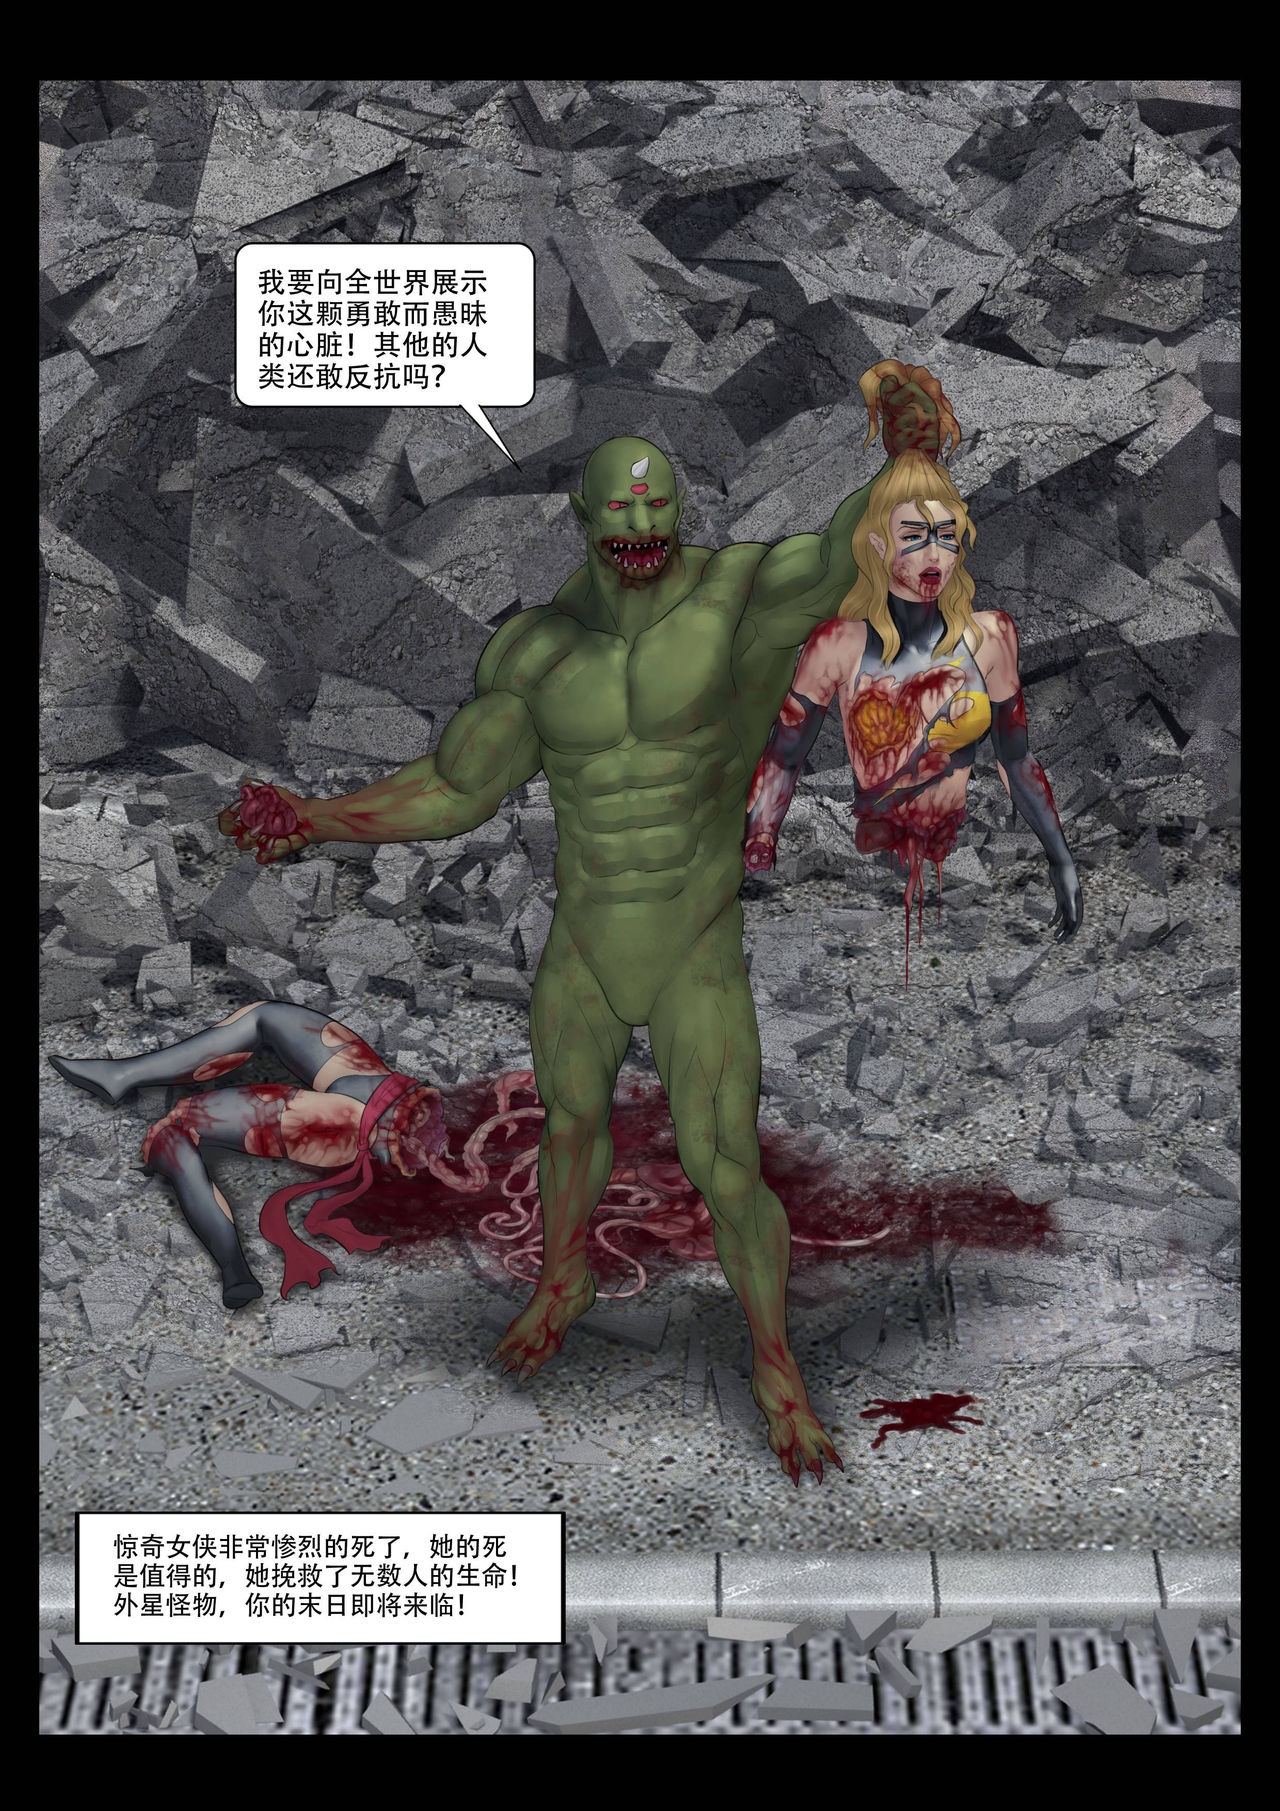 The Nightmare of Avengers Chapter 0 35